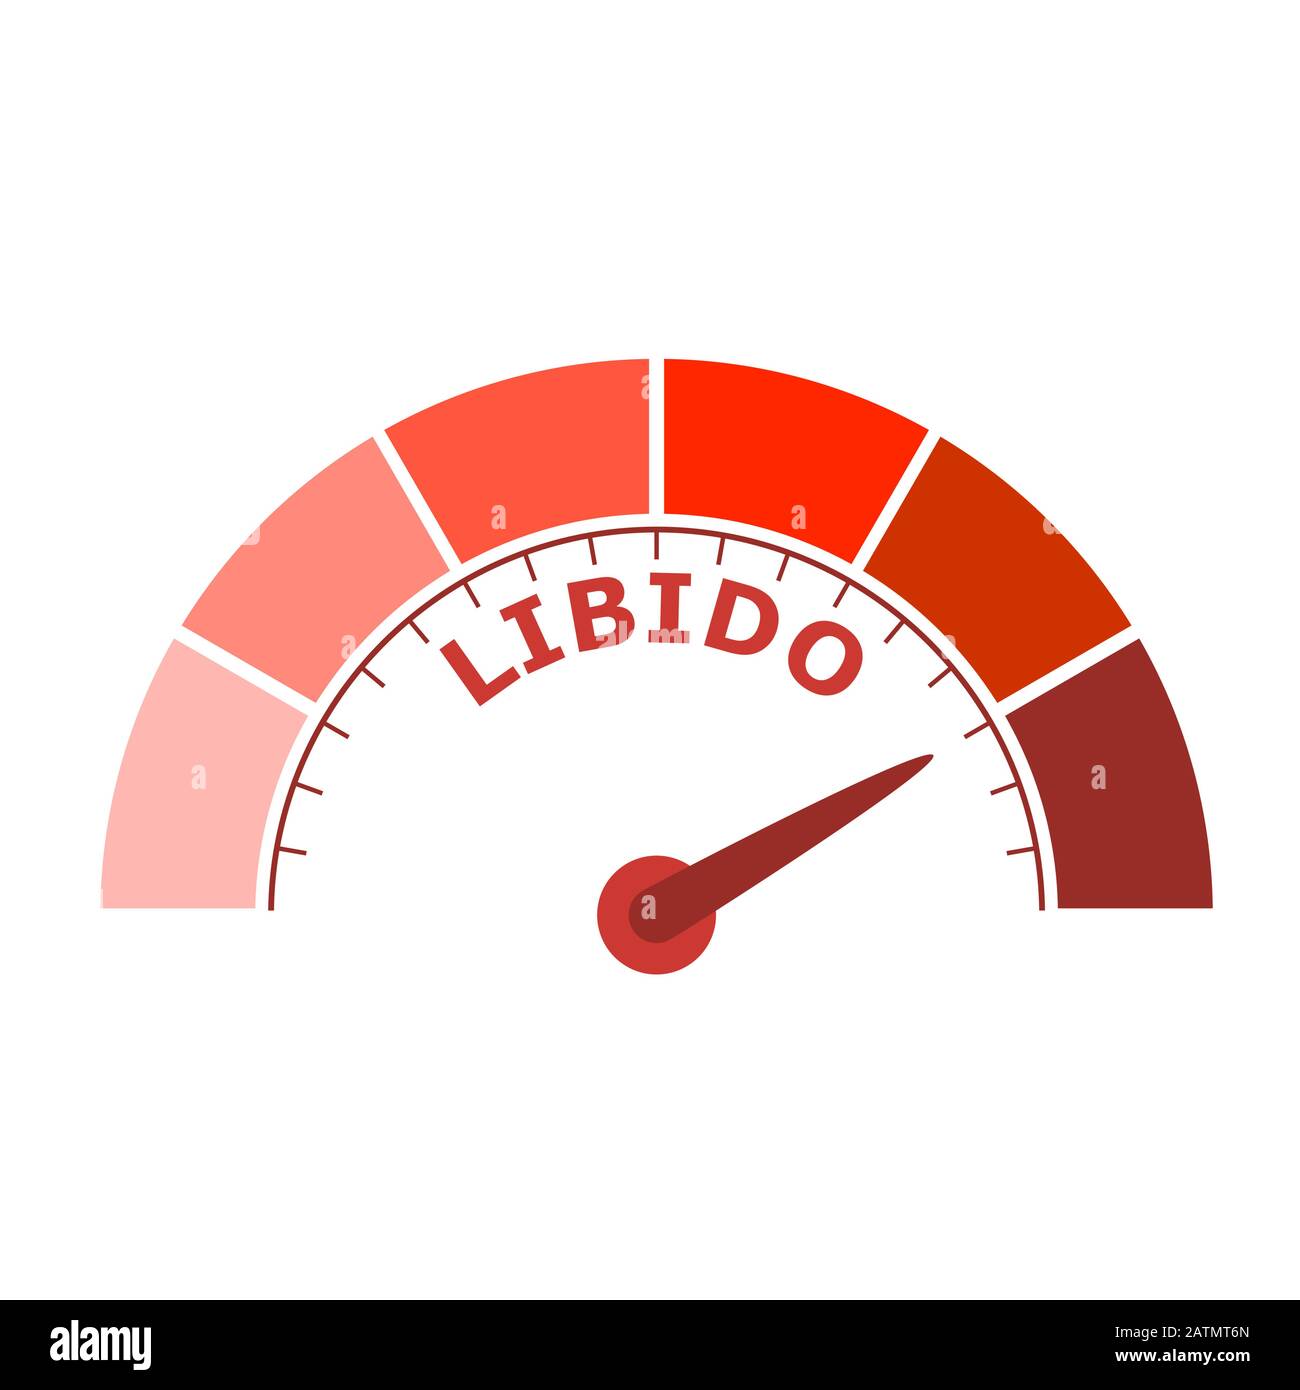 Scale with arrow. The libido level measuring device icon. Sign tachometer, speedometer, indicators. Infographic gauge element. Stock Vector